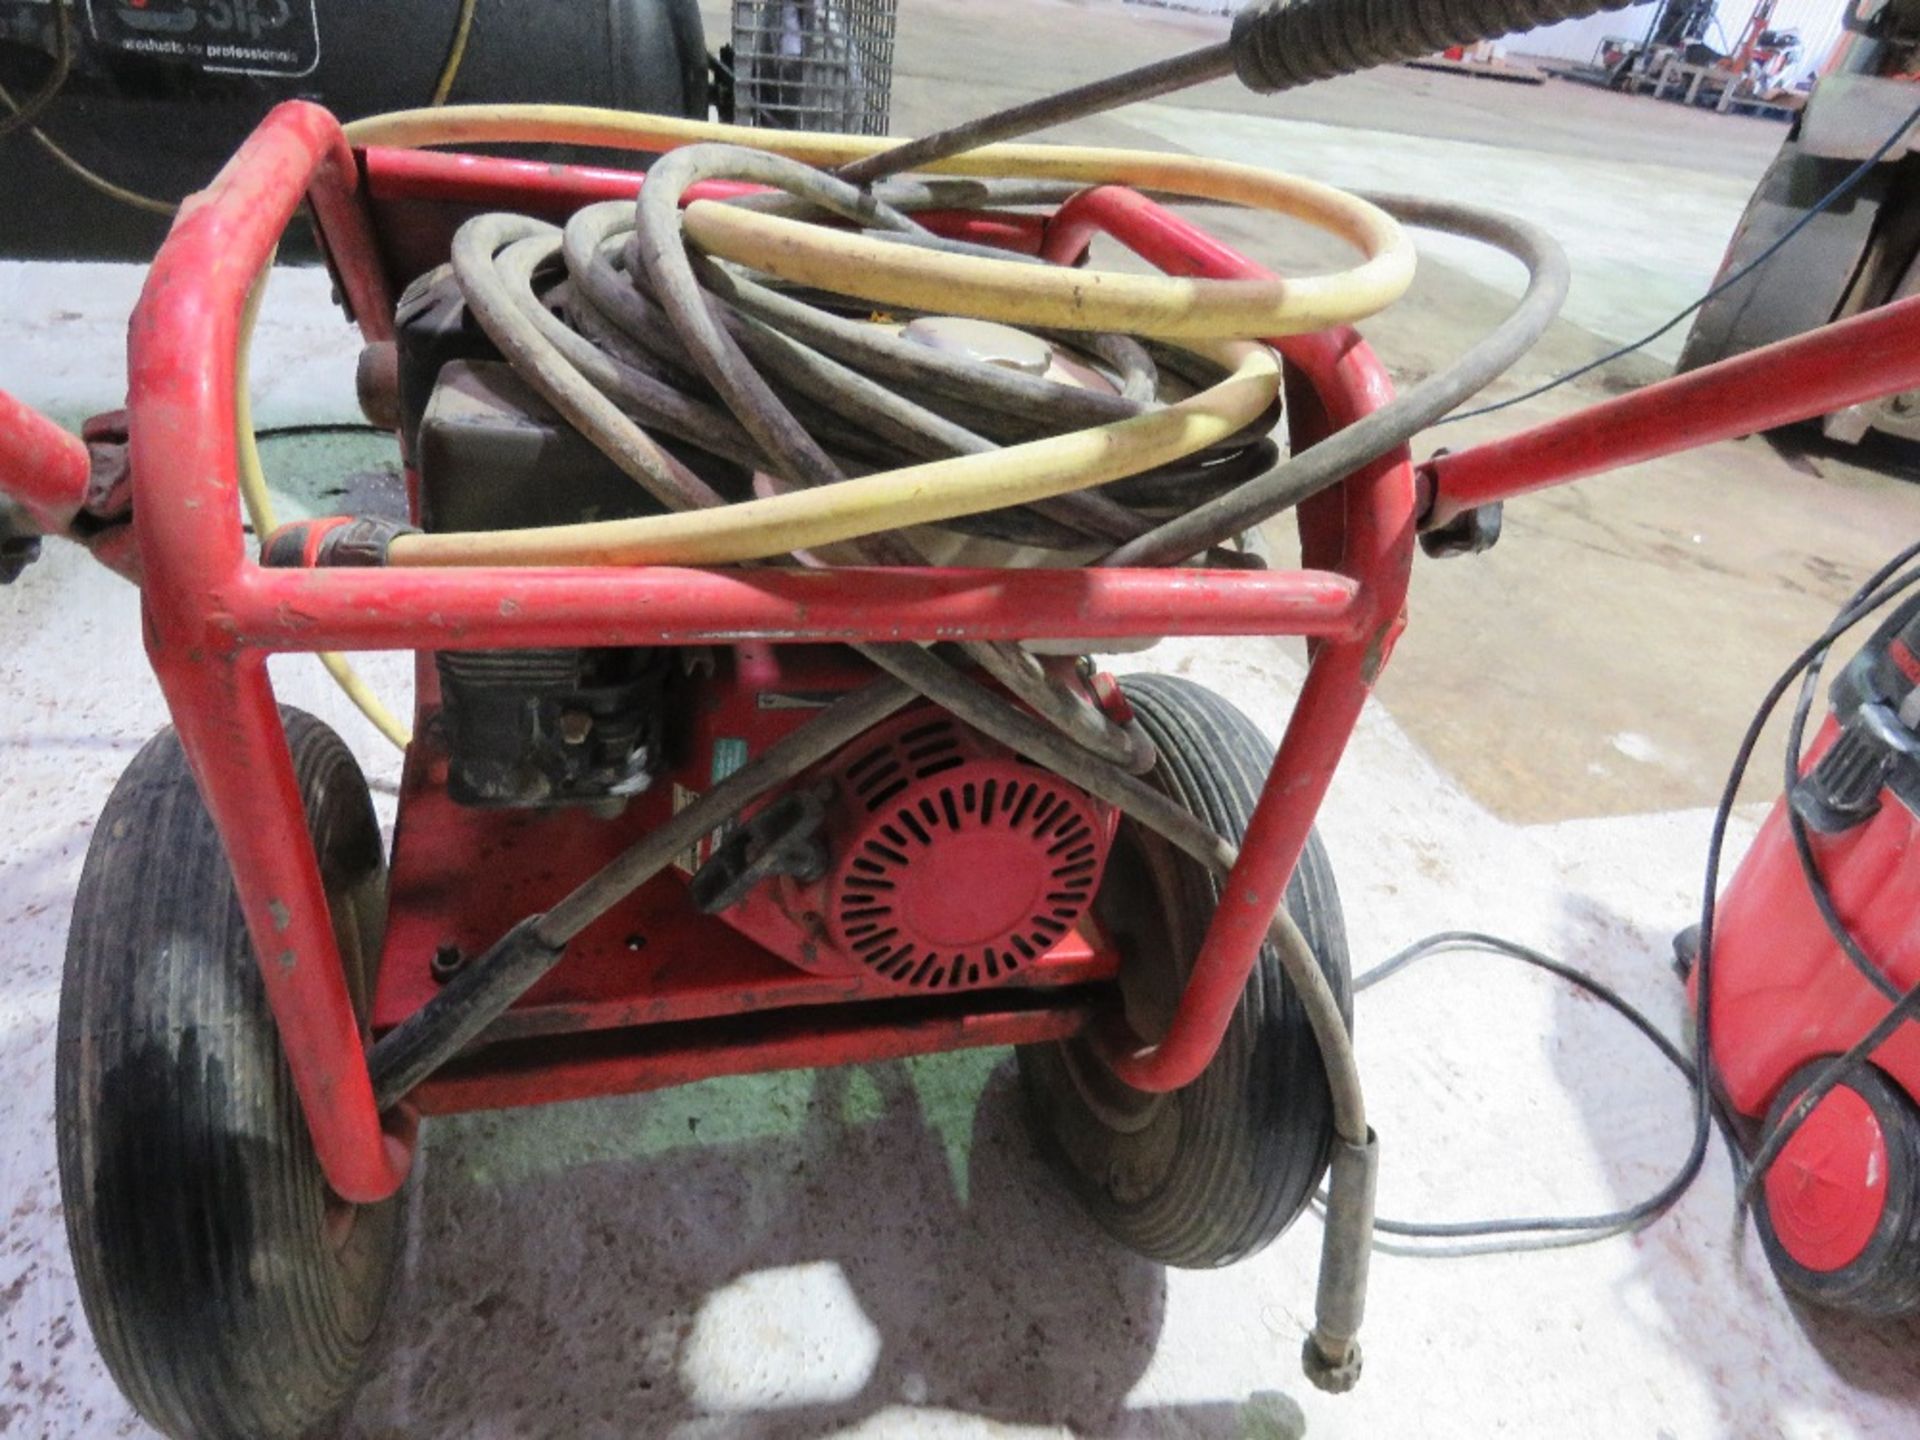 PETROL ENGINED PRESSURE WASHER WITH HOSE AND LANCE. - Image 6 of 8